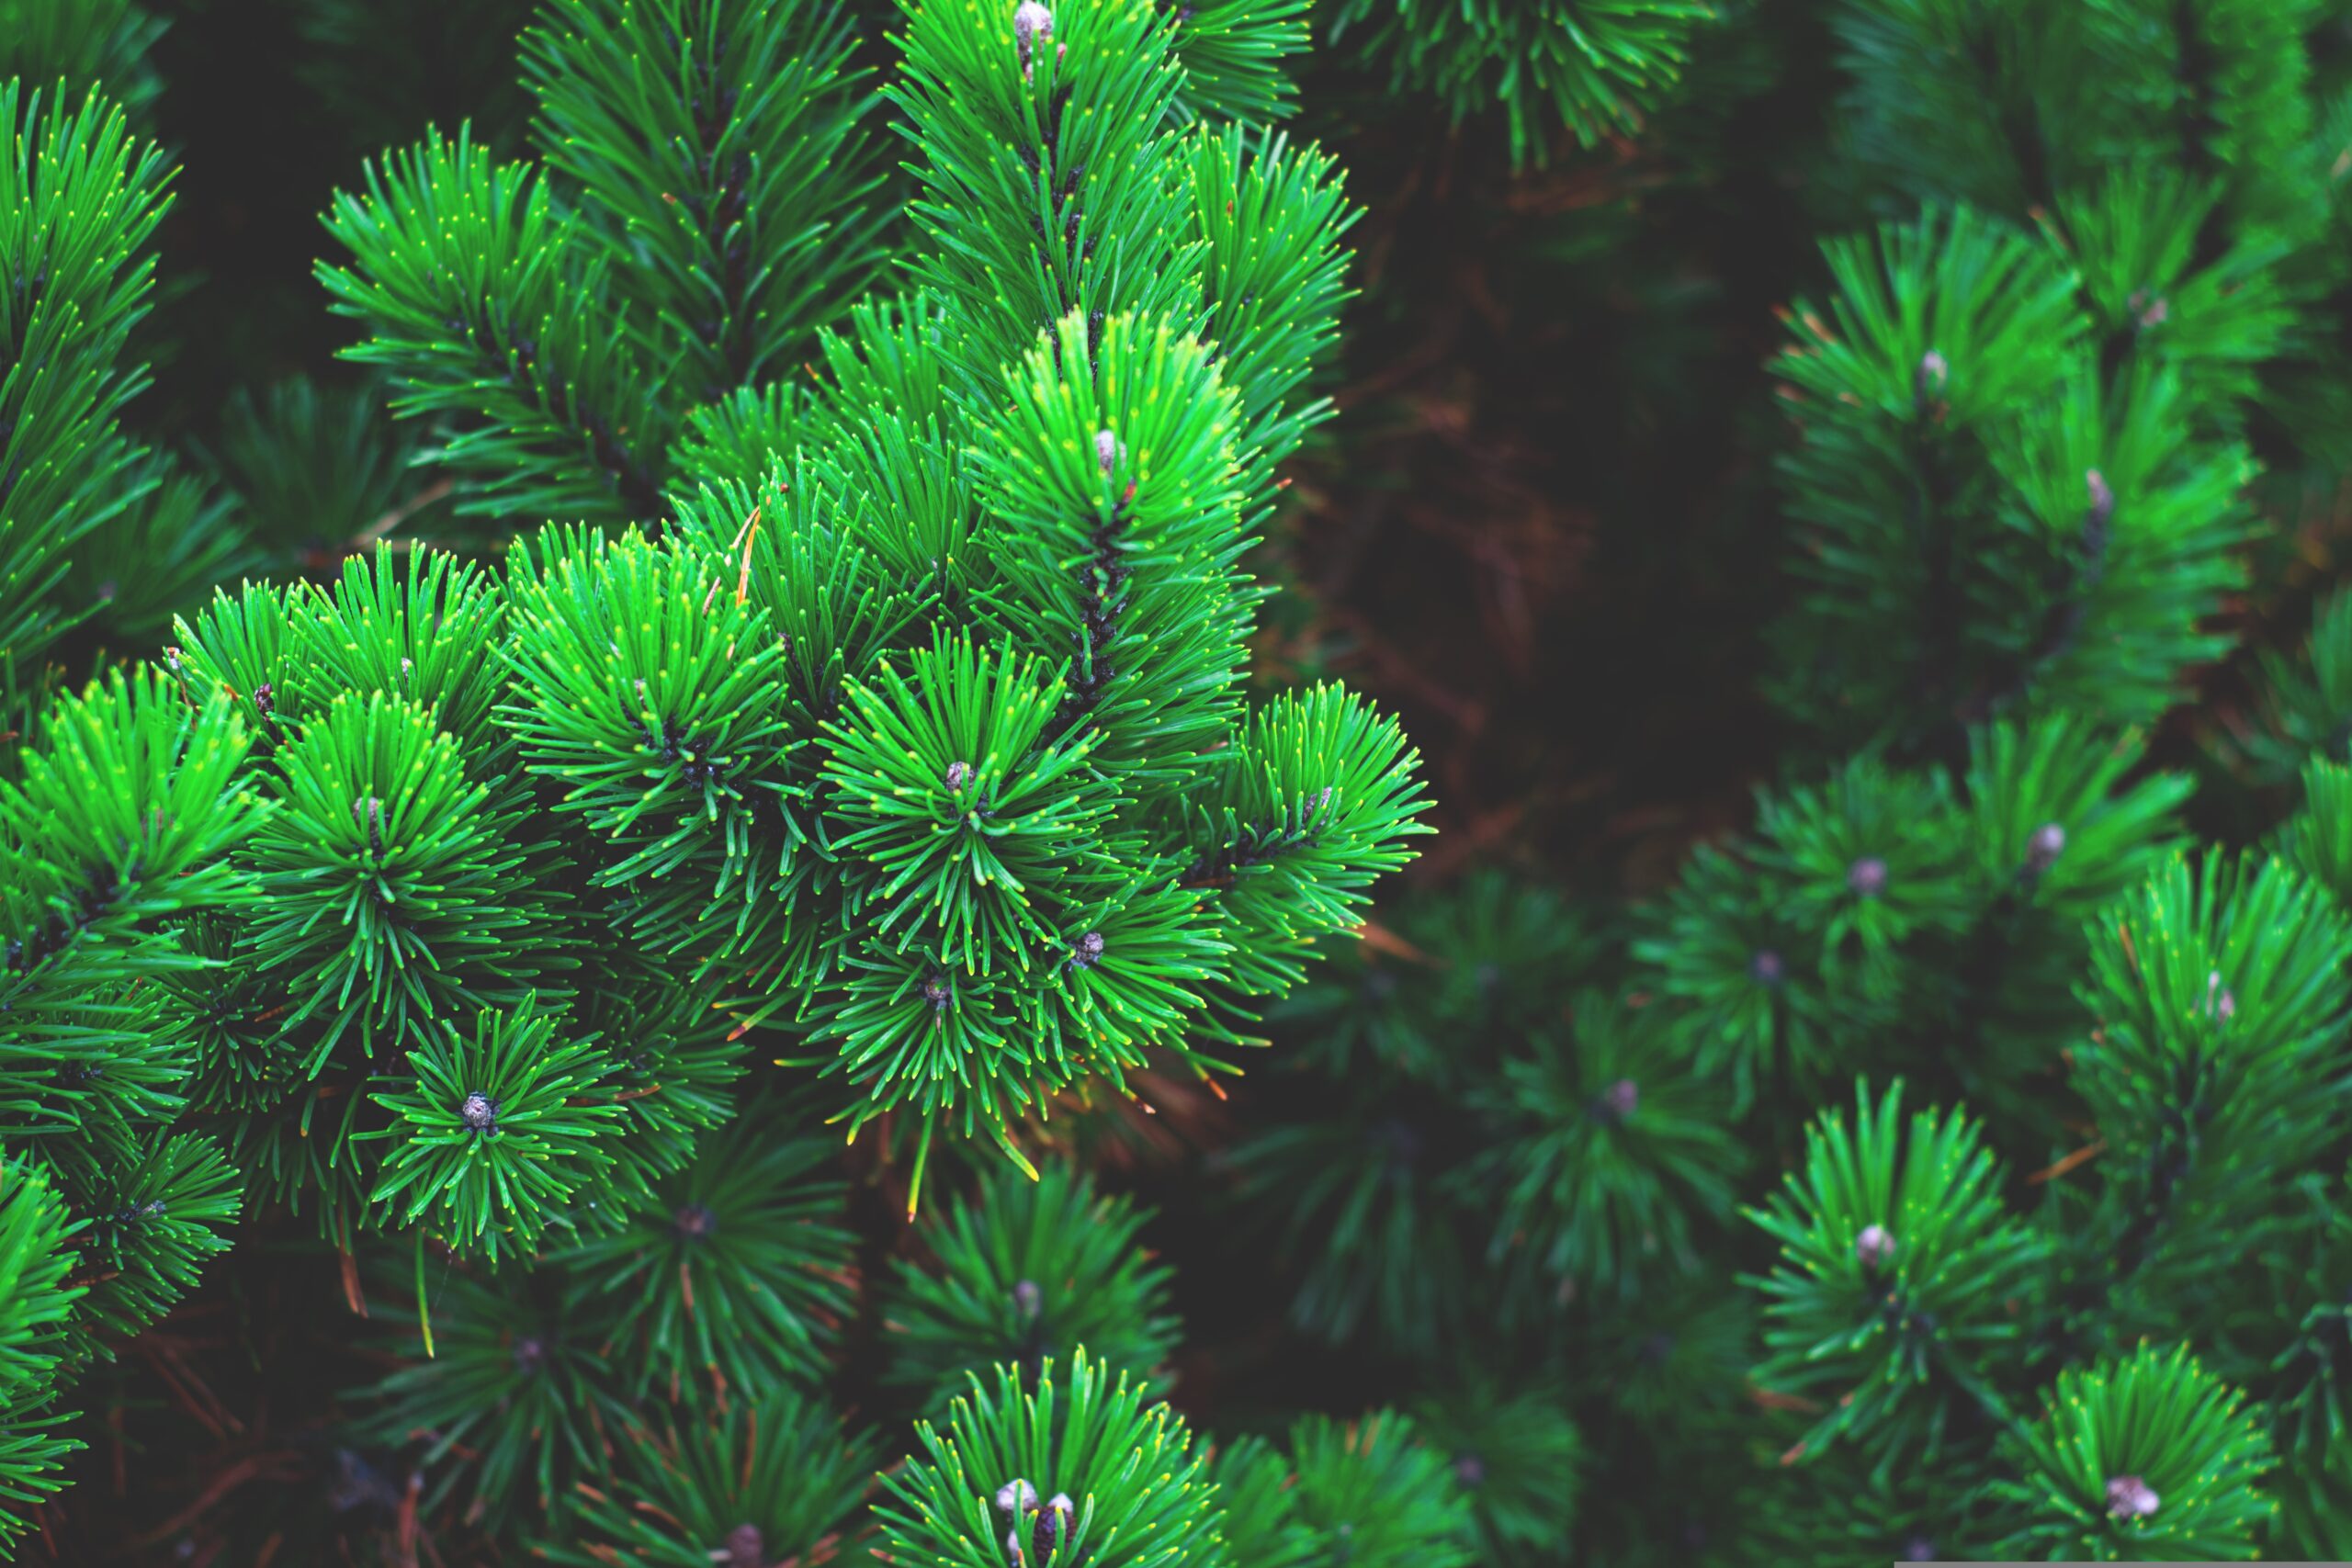 HMRC three-year IT strategy proposes low code and deployment of ‘evergreen reusable’ platforms across department